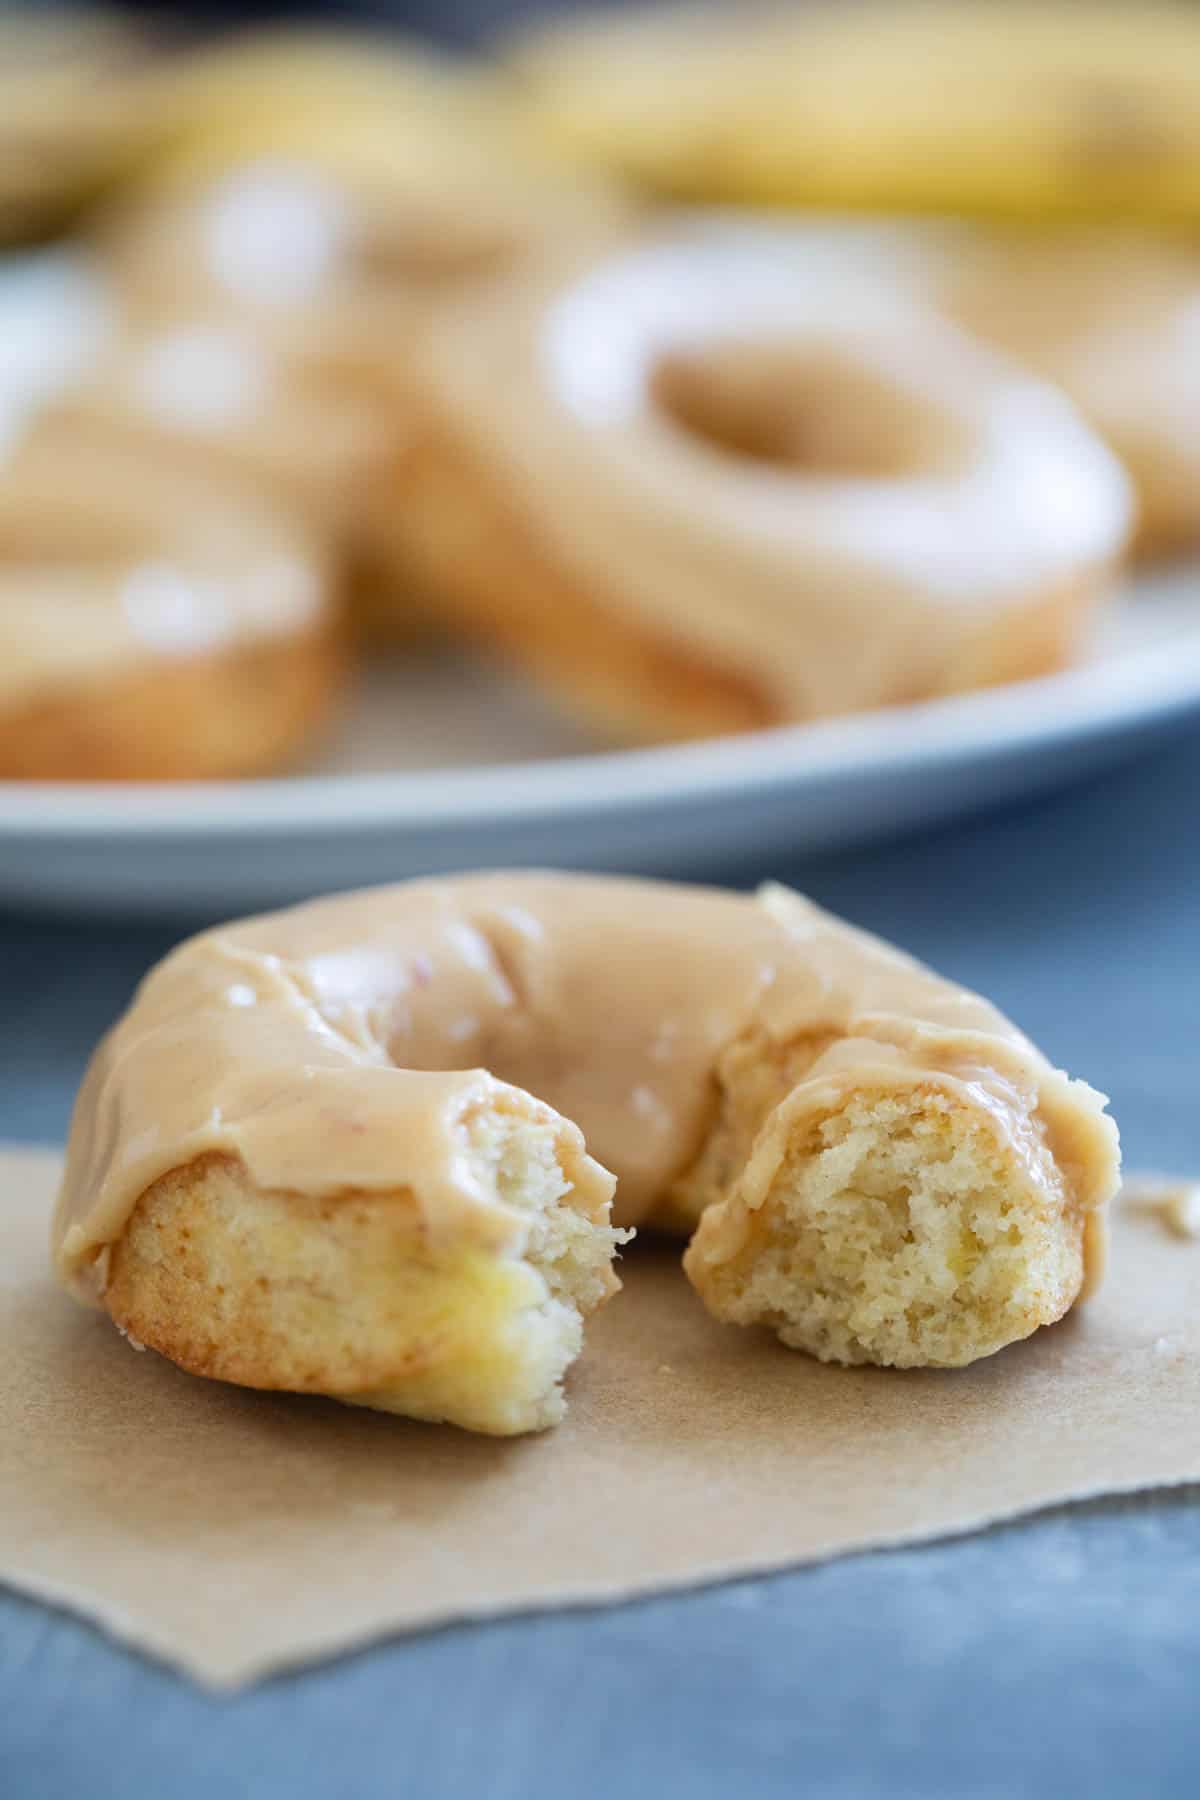 Baked banana donut with peanut butter icing with a bite taken from it.